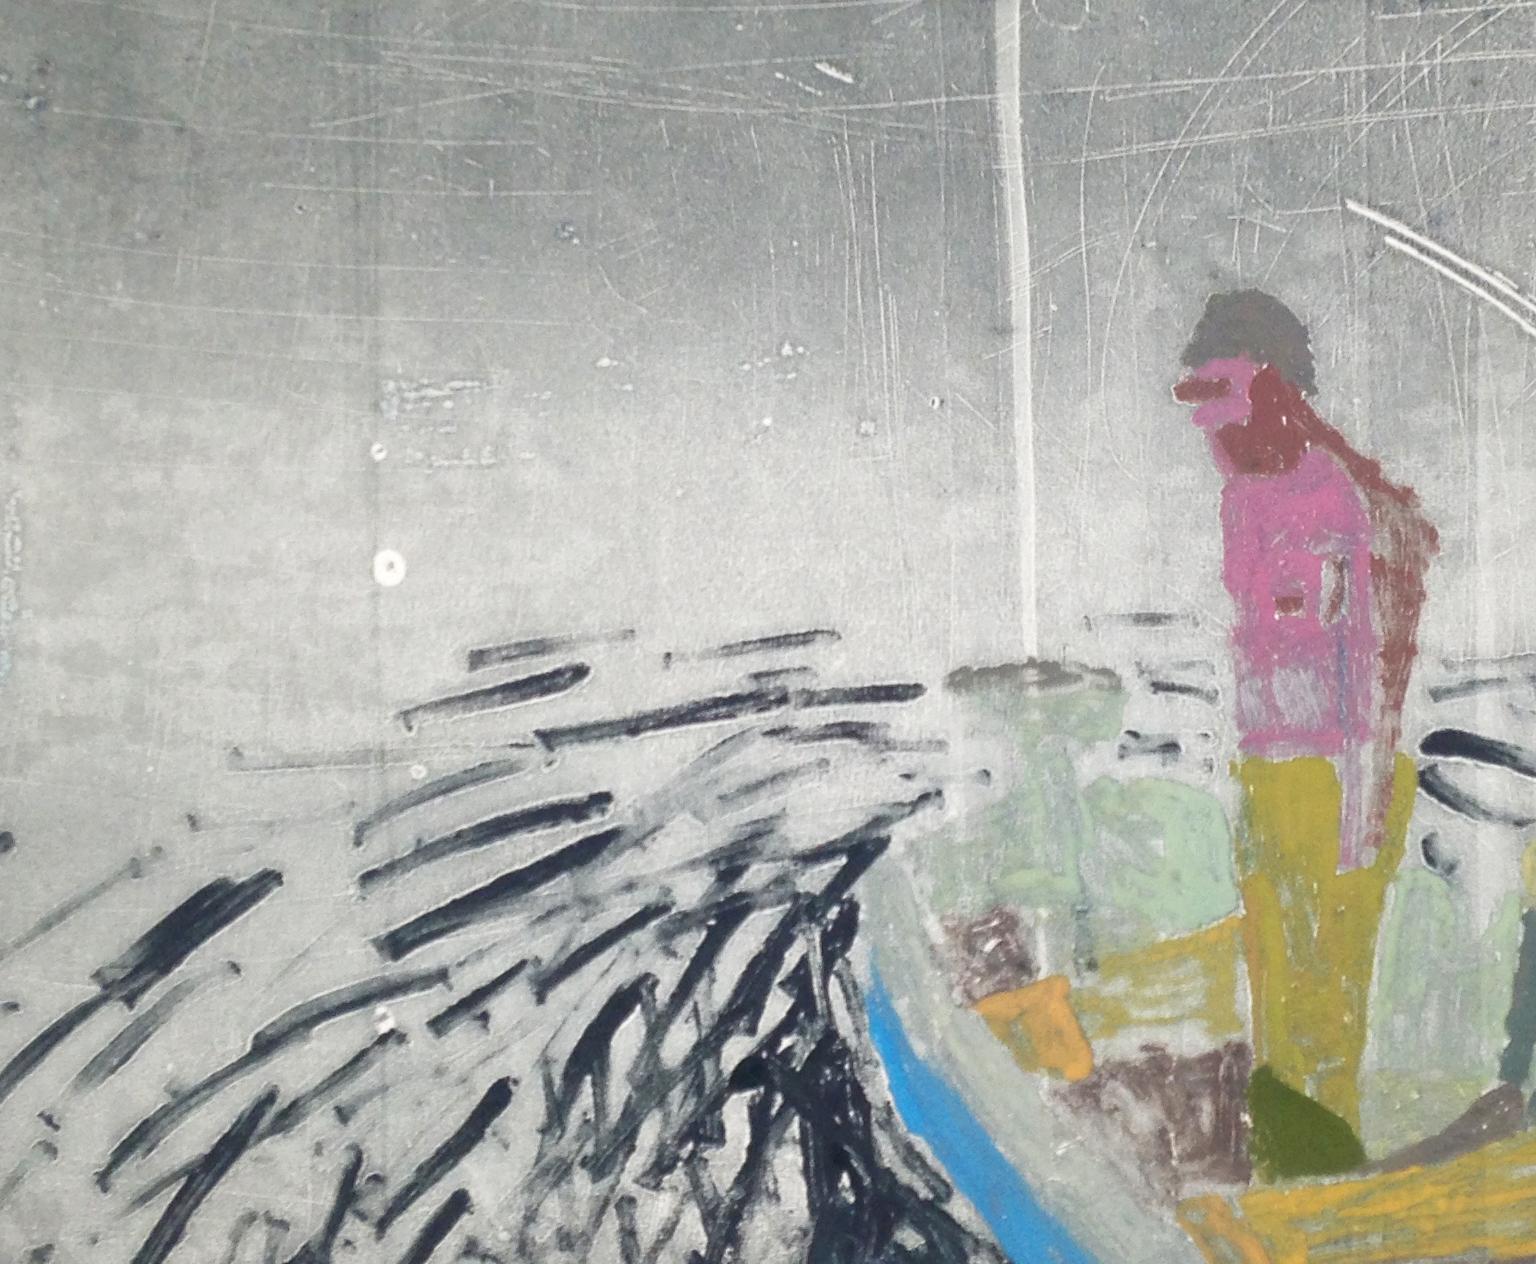 Night Boat, Monotype with Man in Pink Standing in Boat in Water at Nighttime - Contemporary Print by Sophie Treppendahl